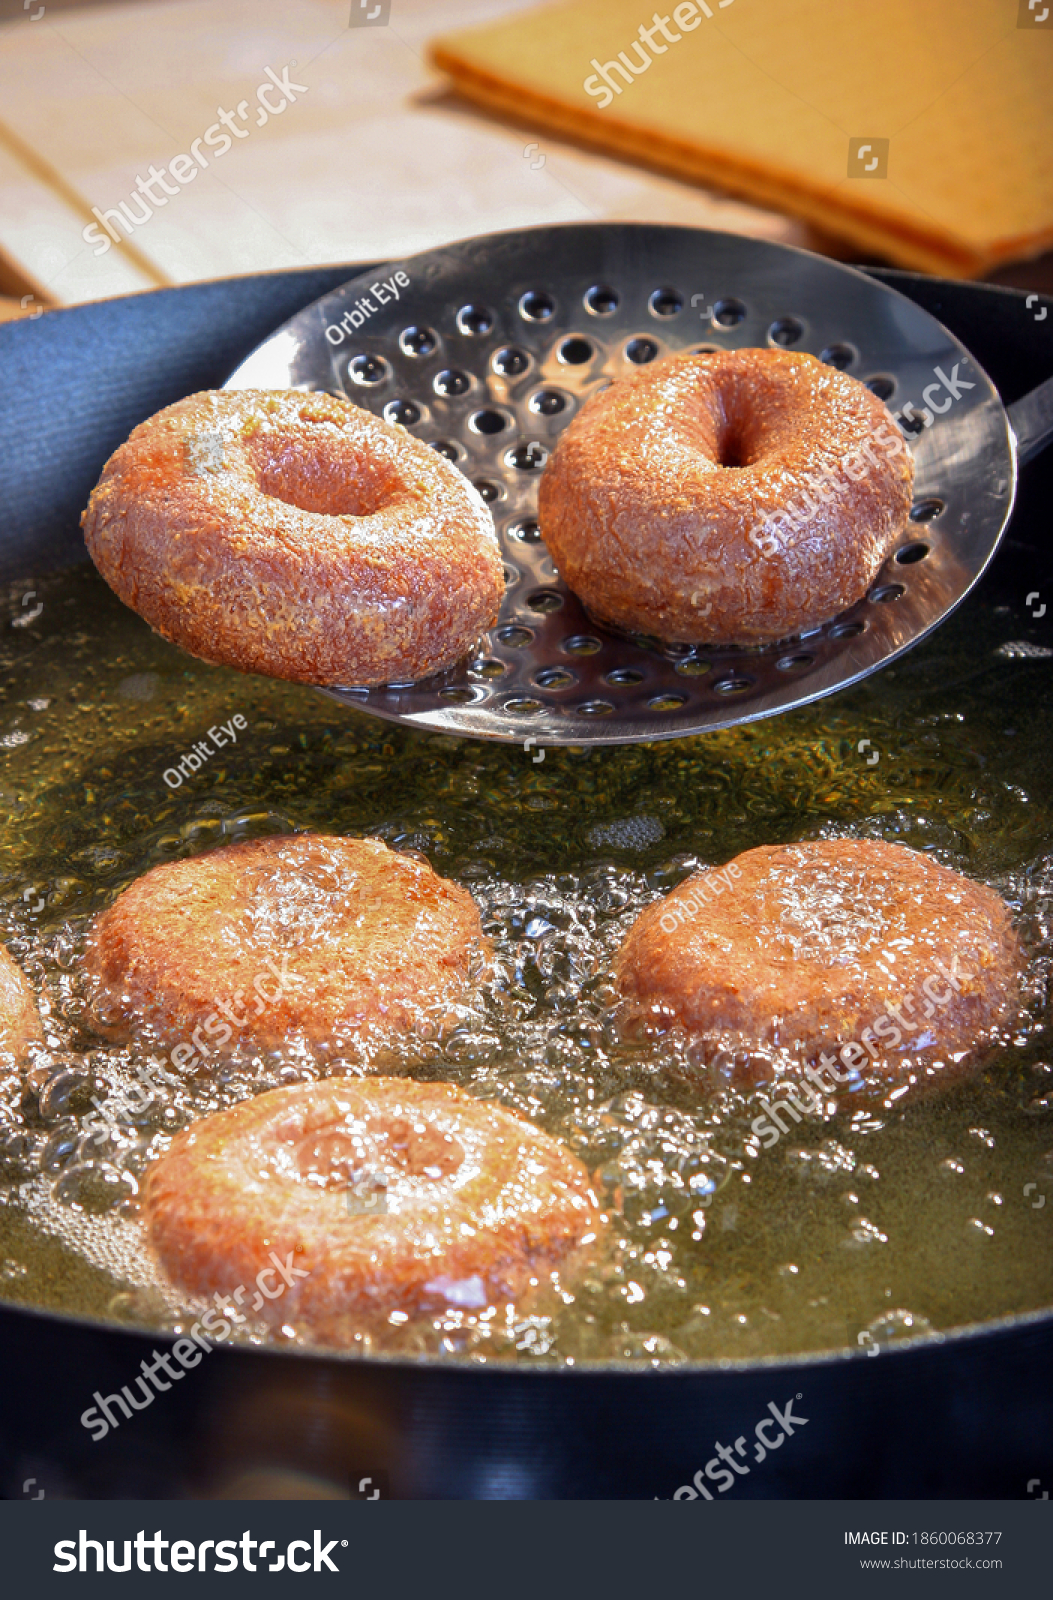 Freshly made donuts coming out of the frier pan and some still cooking in the hot oil. #1860068377